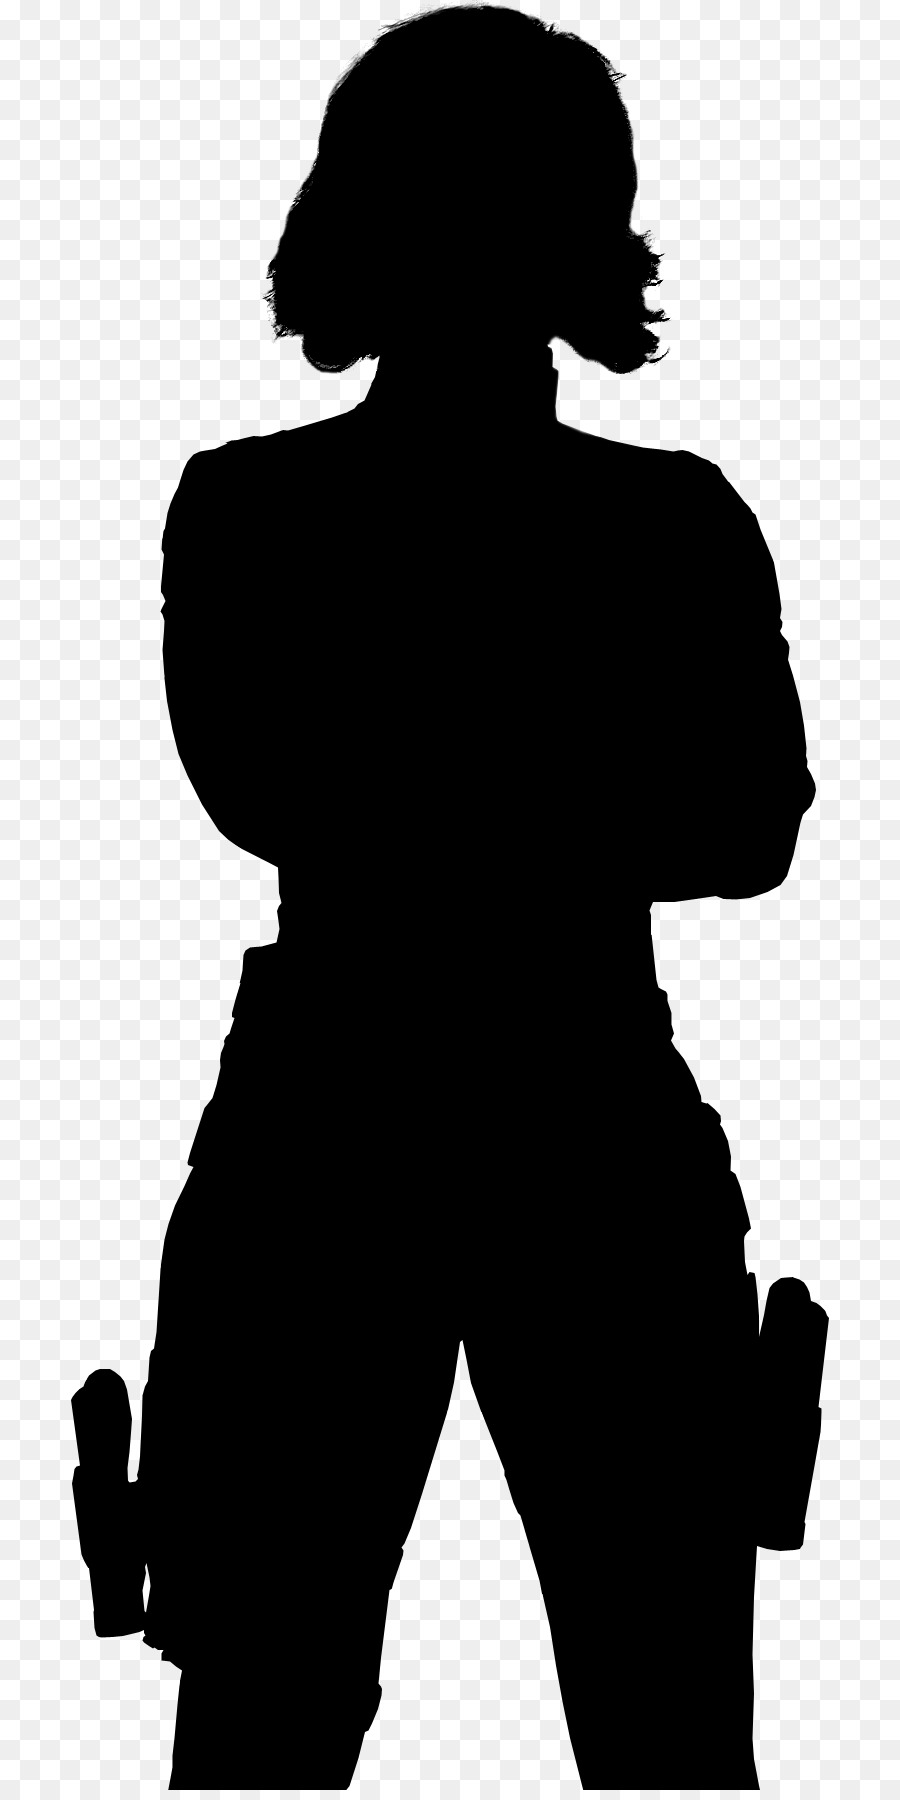 Silhouette Clip art Male Image Man -  png download - 758*1790 - Free Transparent Silhouette png Download.